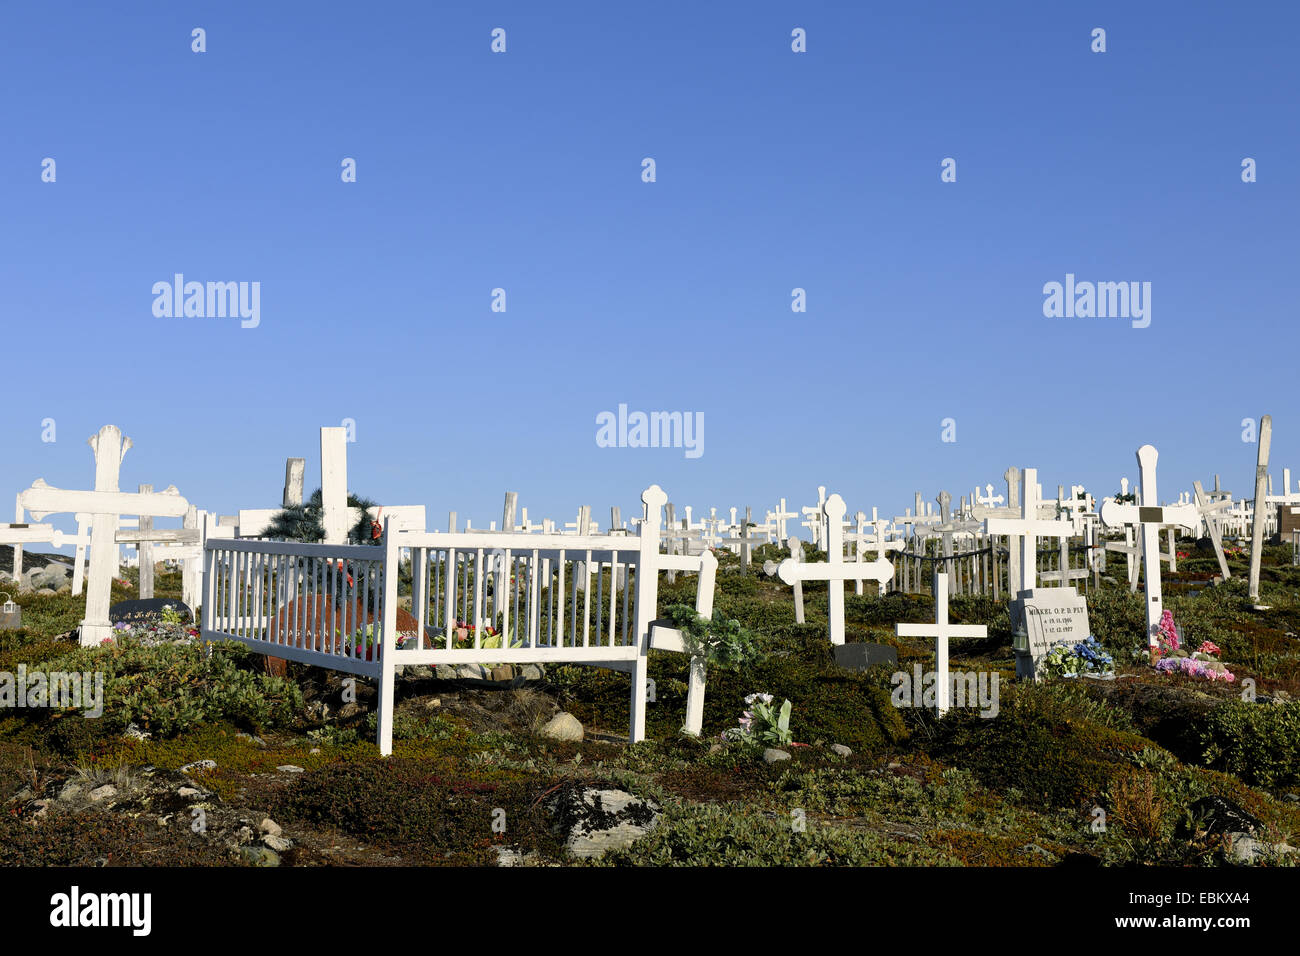 white gave crosses on a cemetery, Greenland, Ilulissat, Disko Bay Stock Photo